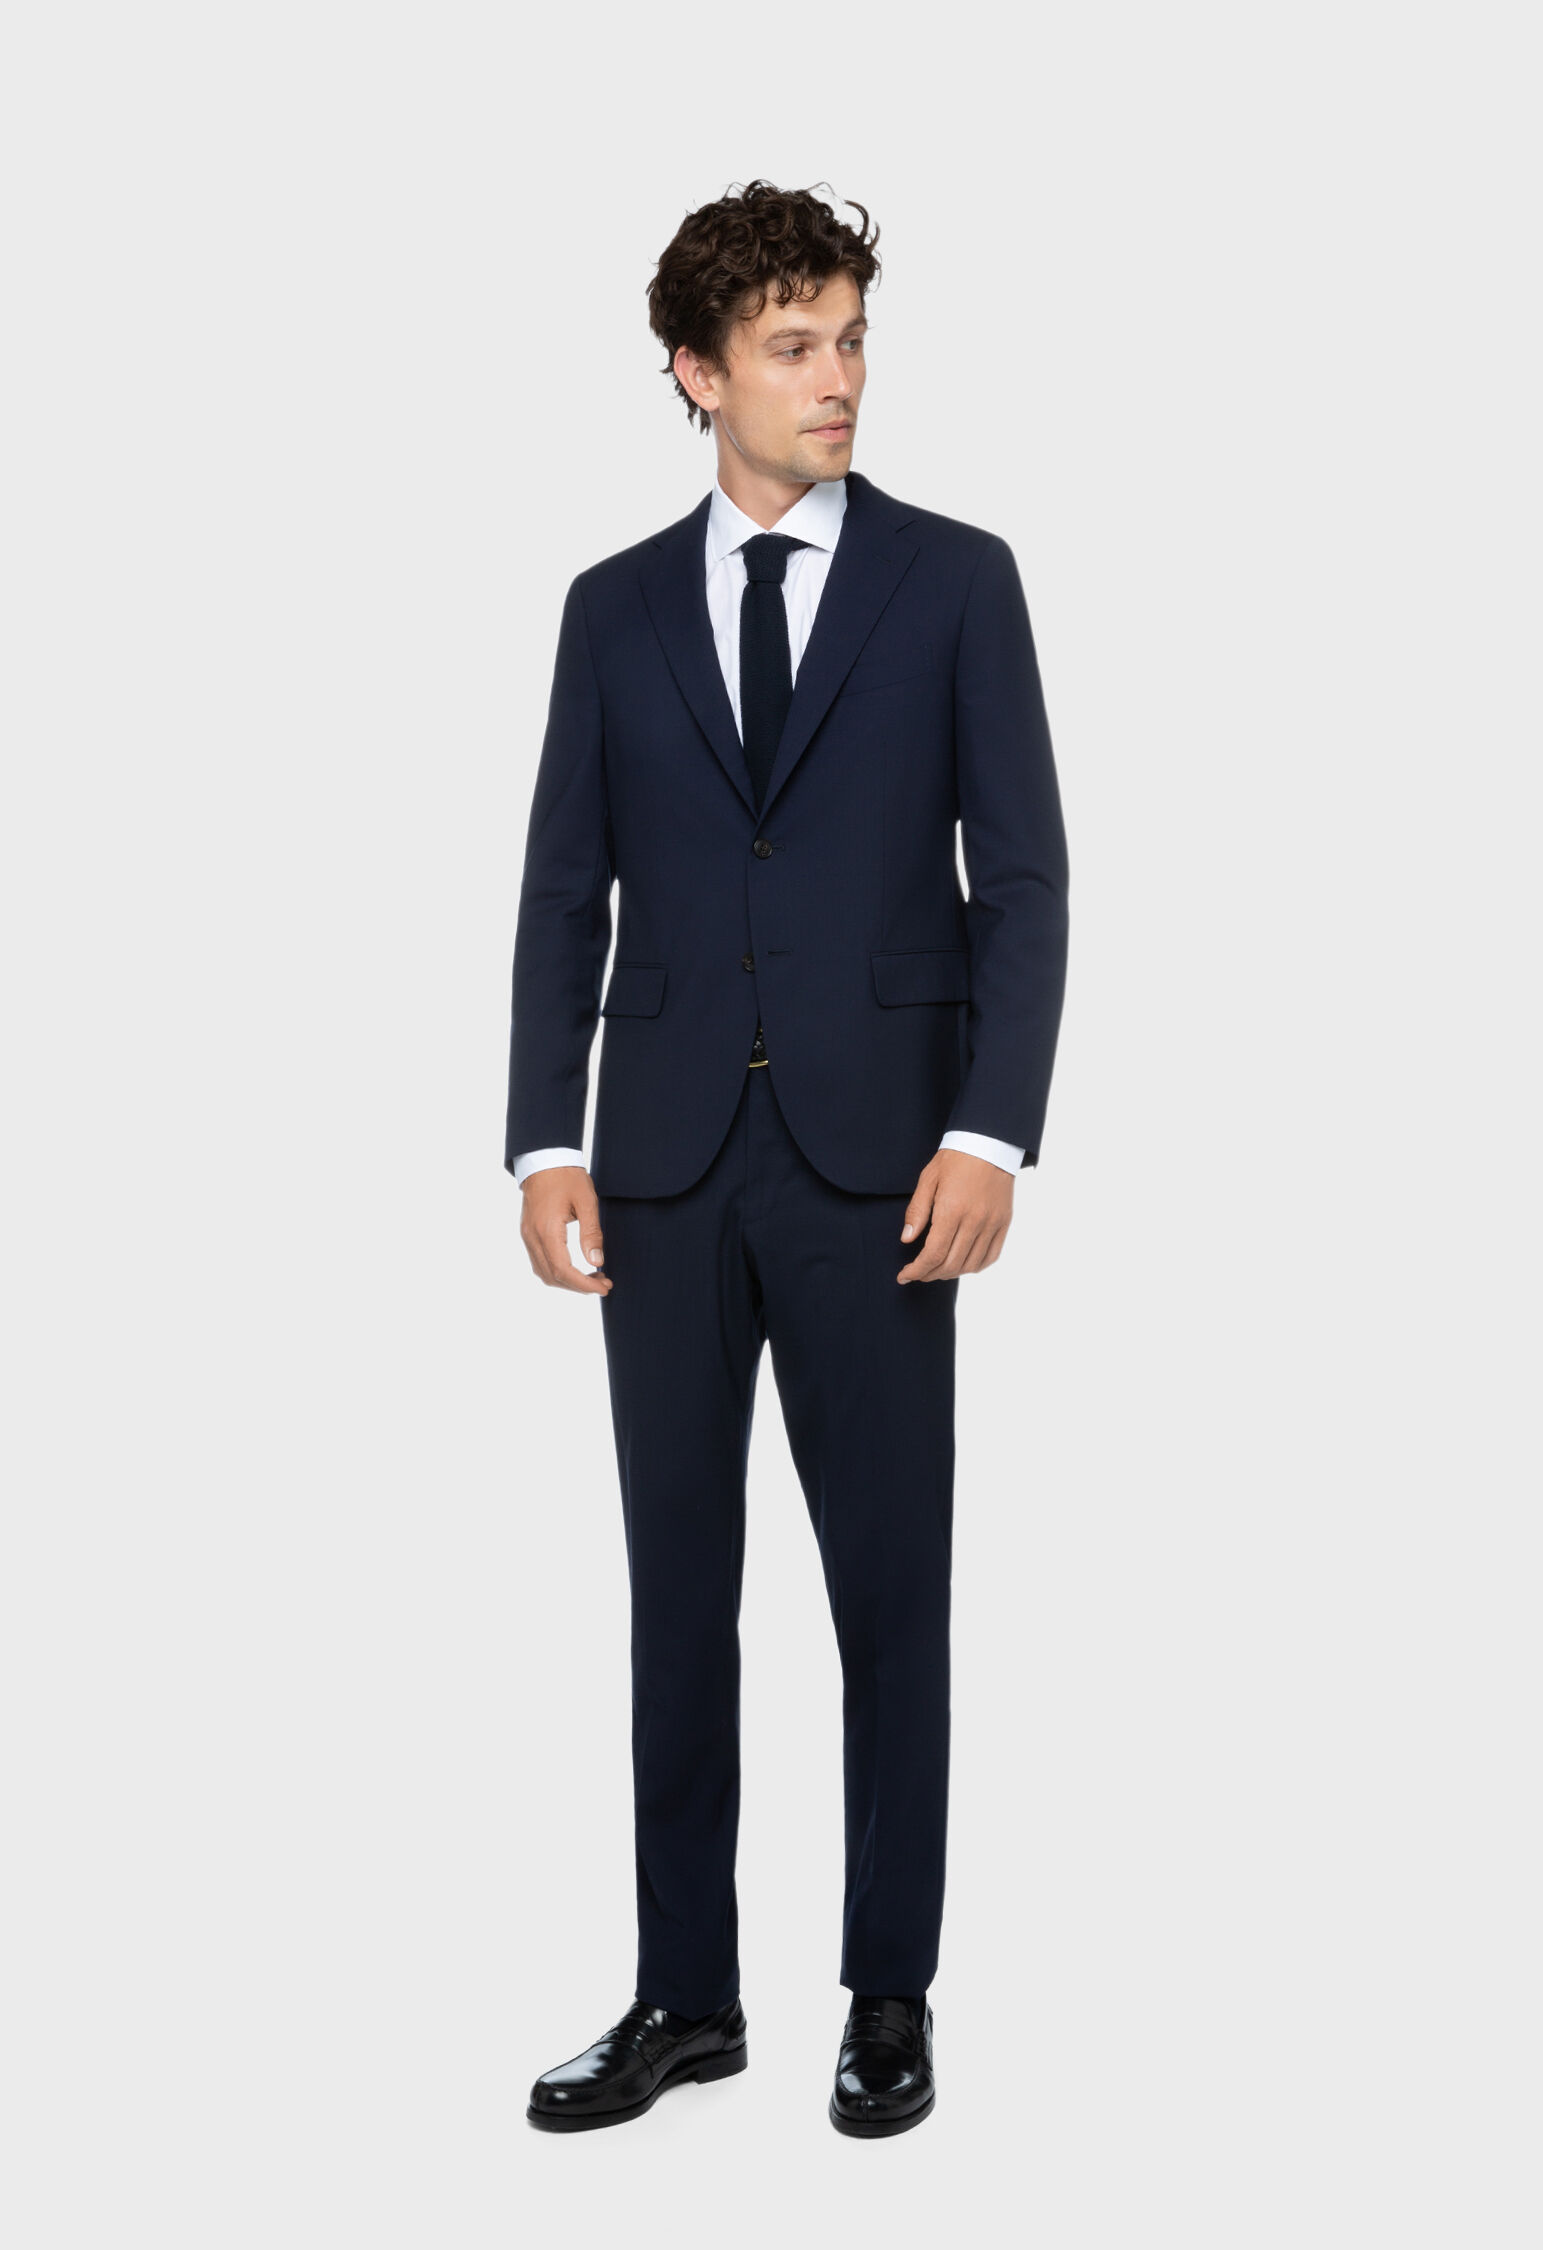 Navy Blue Double Breasted Suits | Double breasted, Italian style suit, Suits